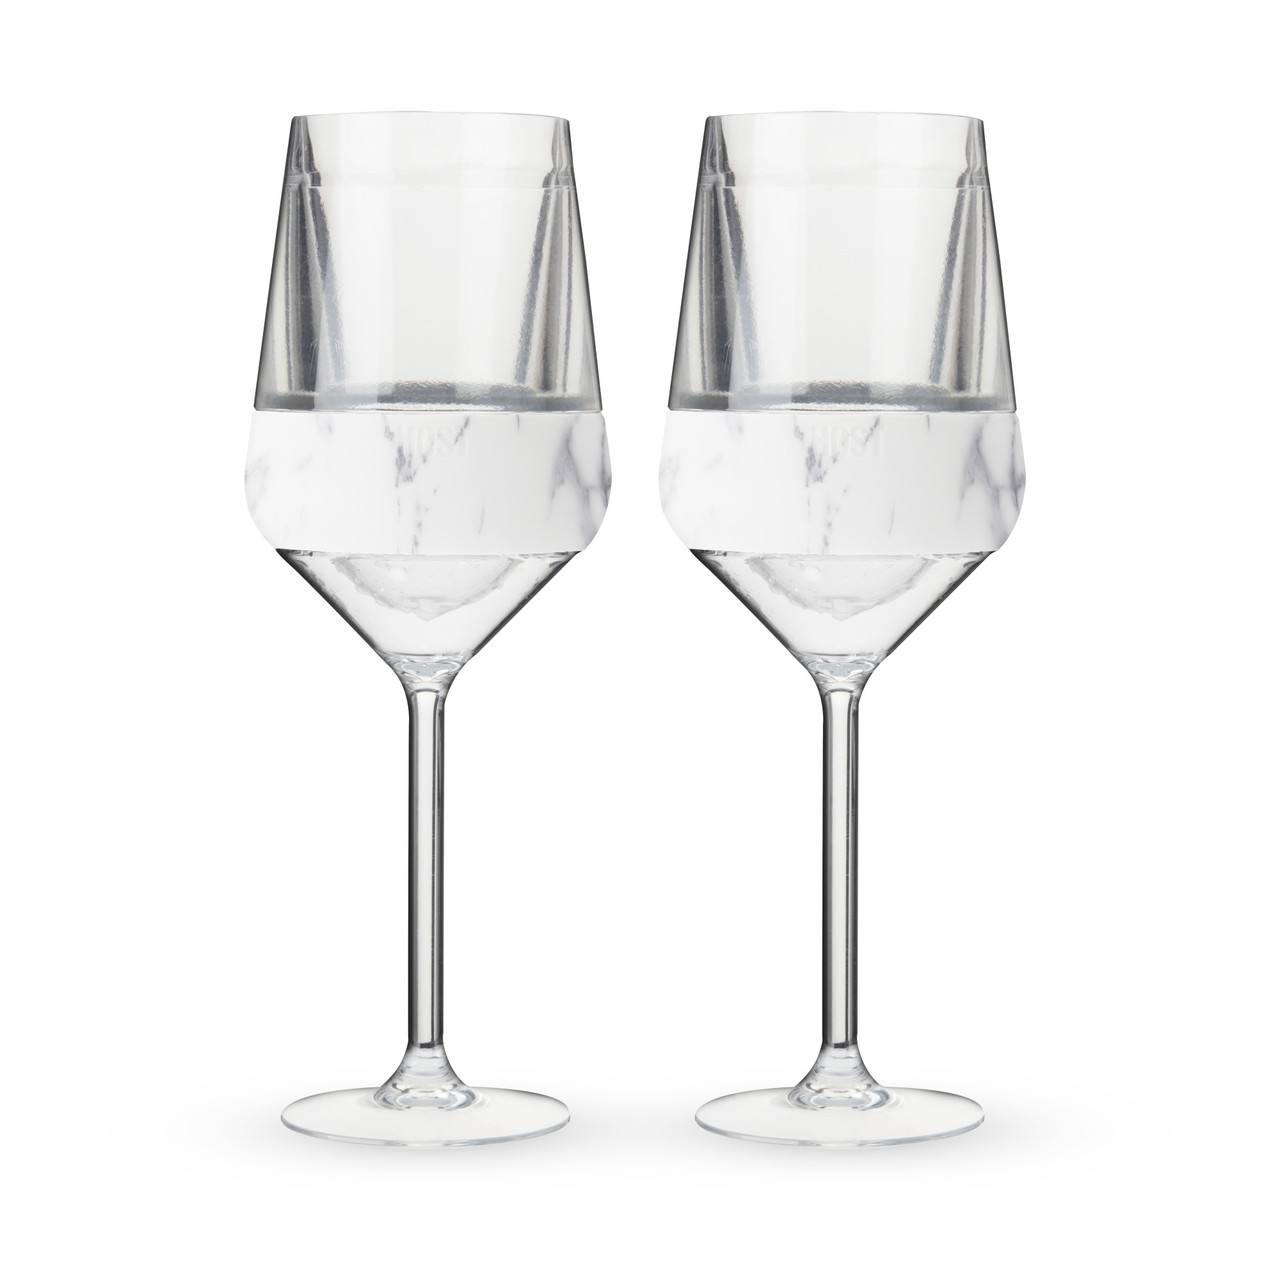 https://cdn11.bigcommerce.com/s-oo0gdojvjo/images/stencil/1280x1280/products/68874/101016/wine-freeze-in-marble-stemmed-wine-glasses-by-host-set-of-2__07162.1683777580.jpg?c=2